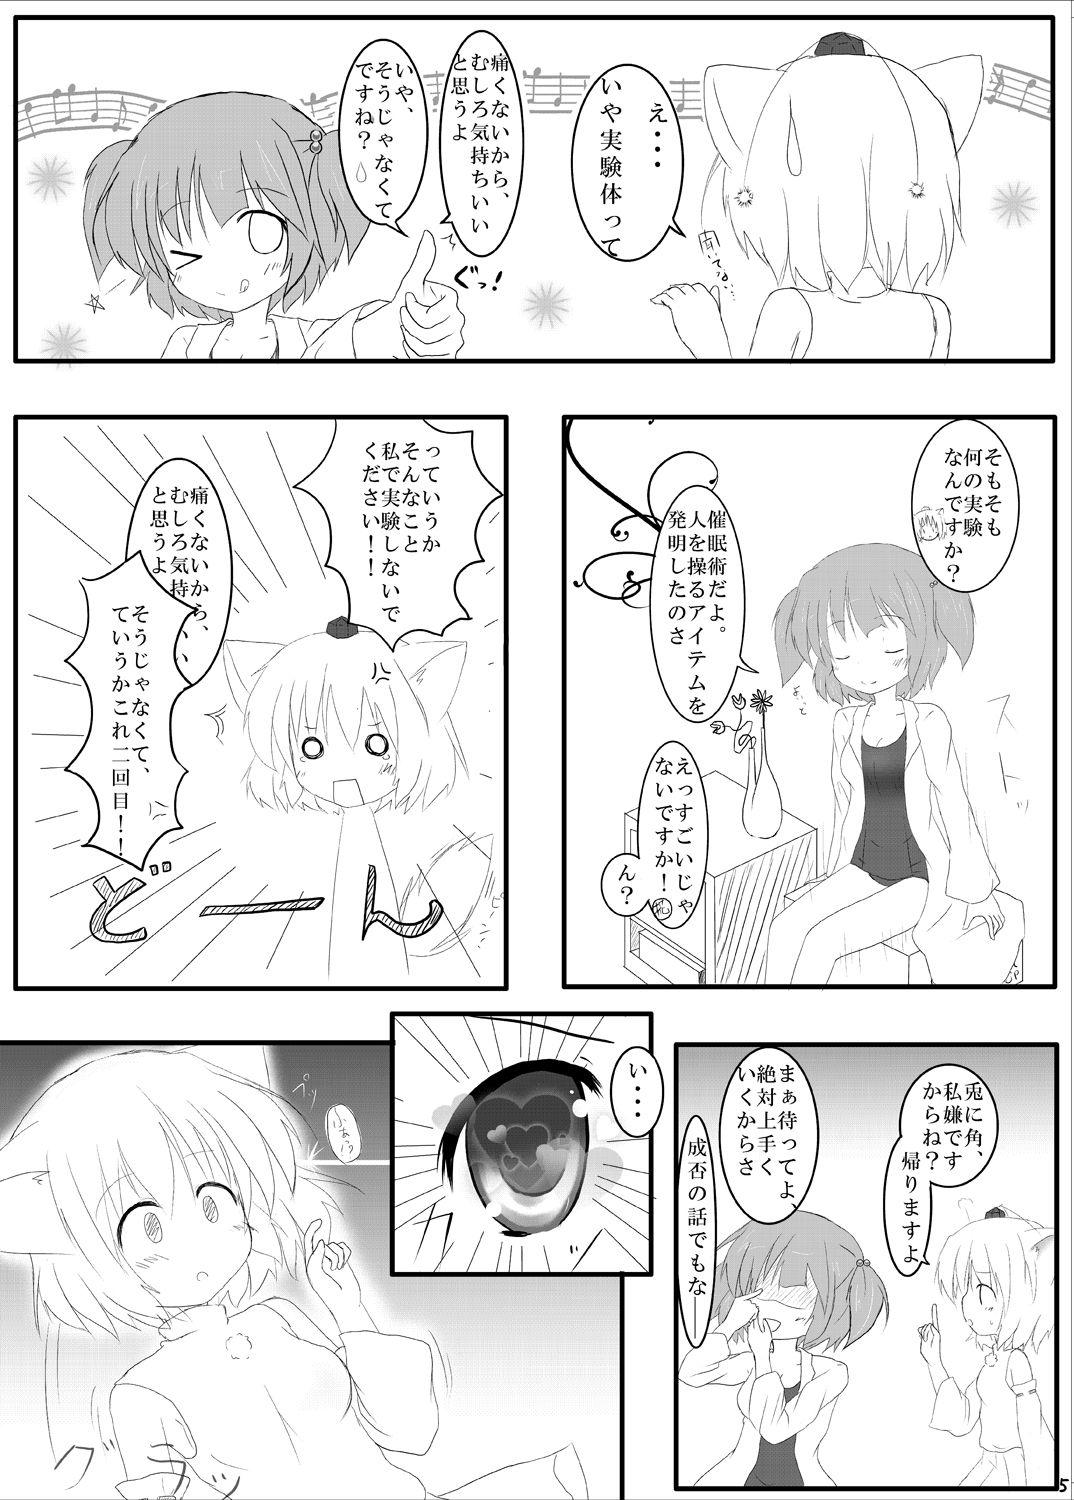 Periscope H na "Me" ni Acchatta! - Touhou project Sister - Page 4